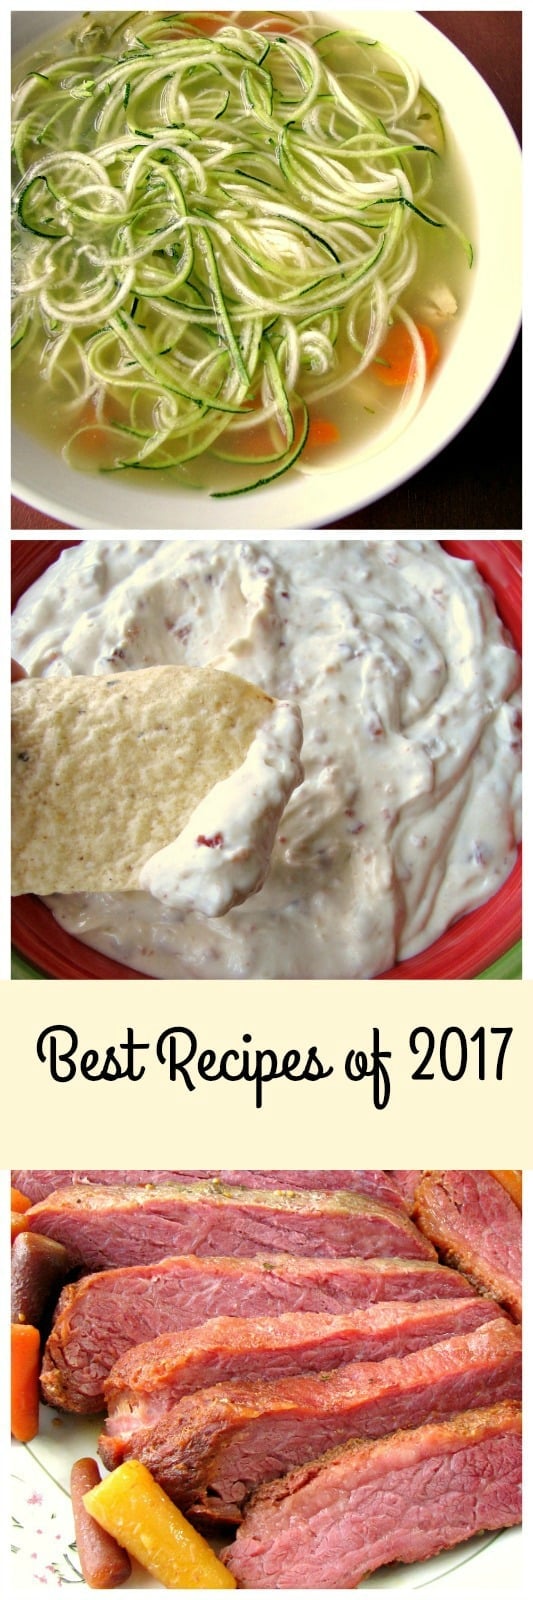 The Best Recipes of 2017 (Winter) including Chicken Noodle Soup, Bacon Horseradish Dip, and Slow Cooker Honey Apple Corned Beef. 